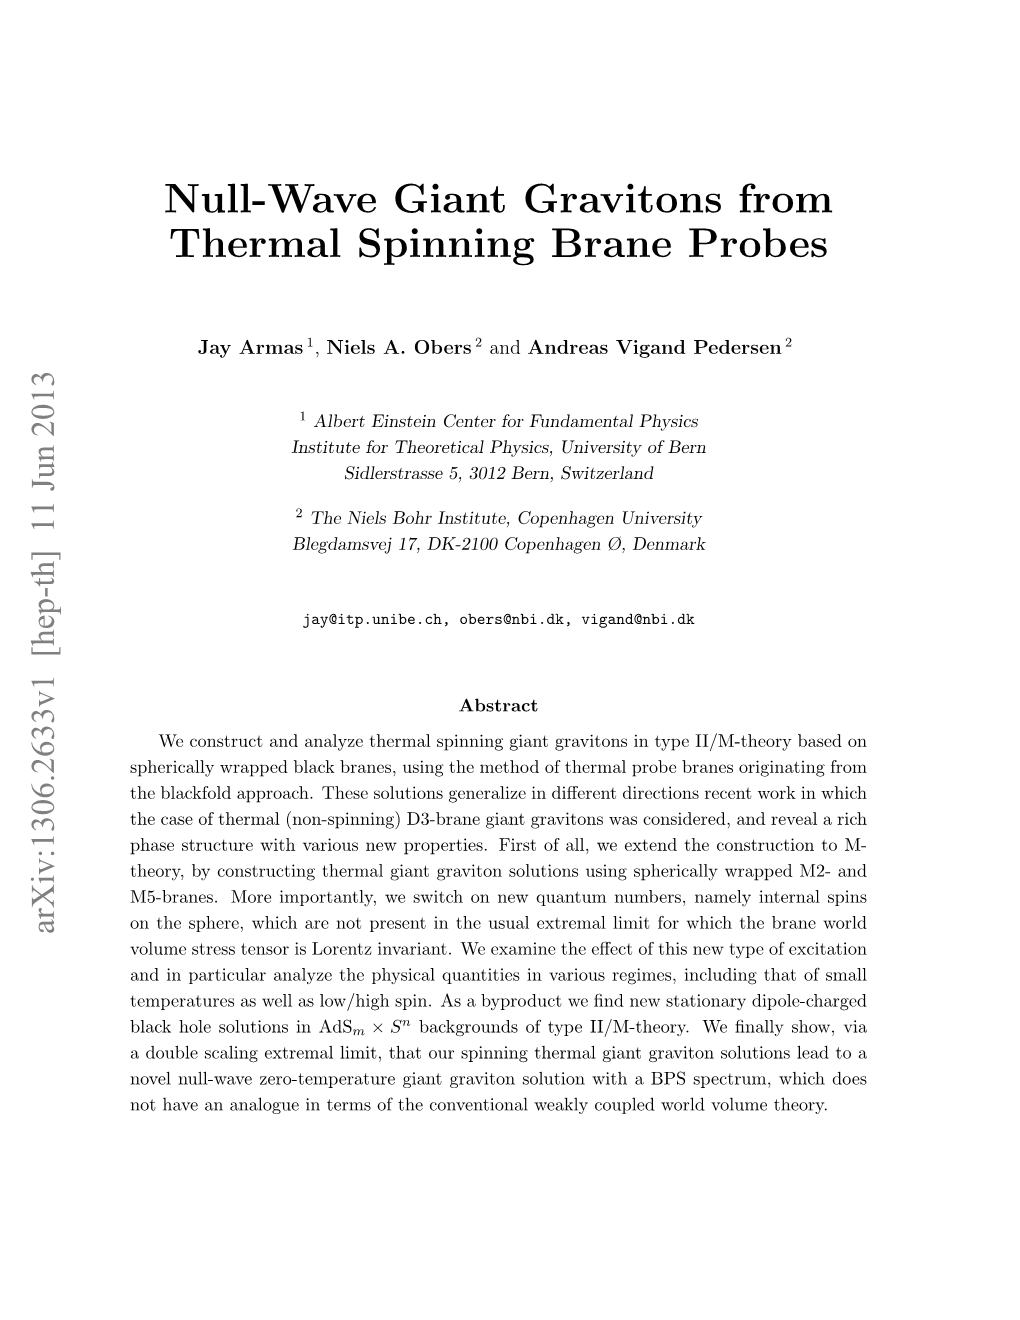 Null-Wave Giant Gravitons from Thermal Spinning Brane Probes